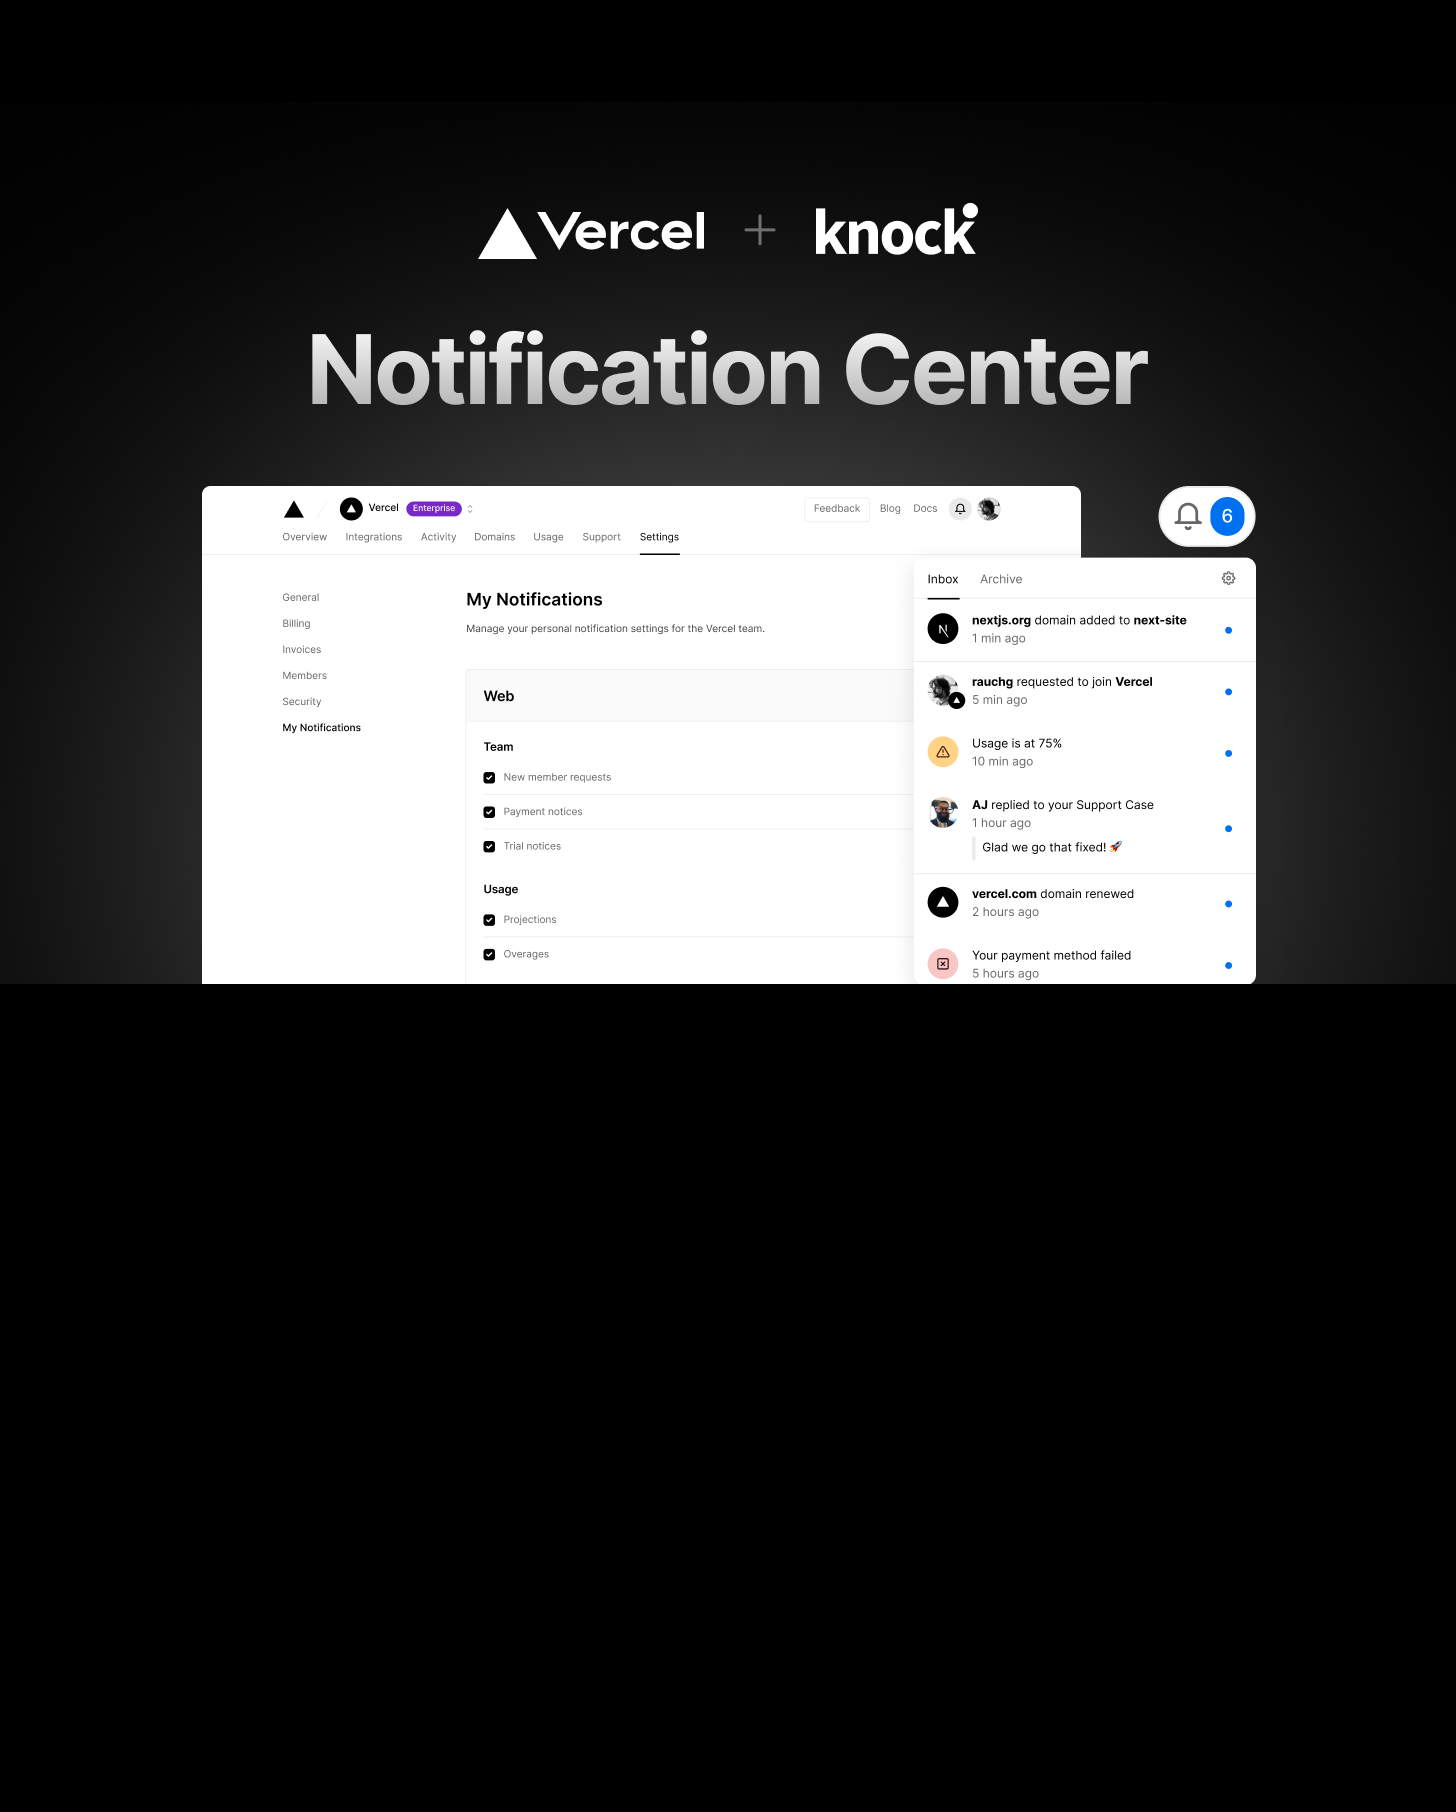 Building a powerful notification system for Vercel with Knock